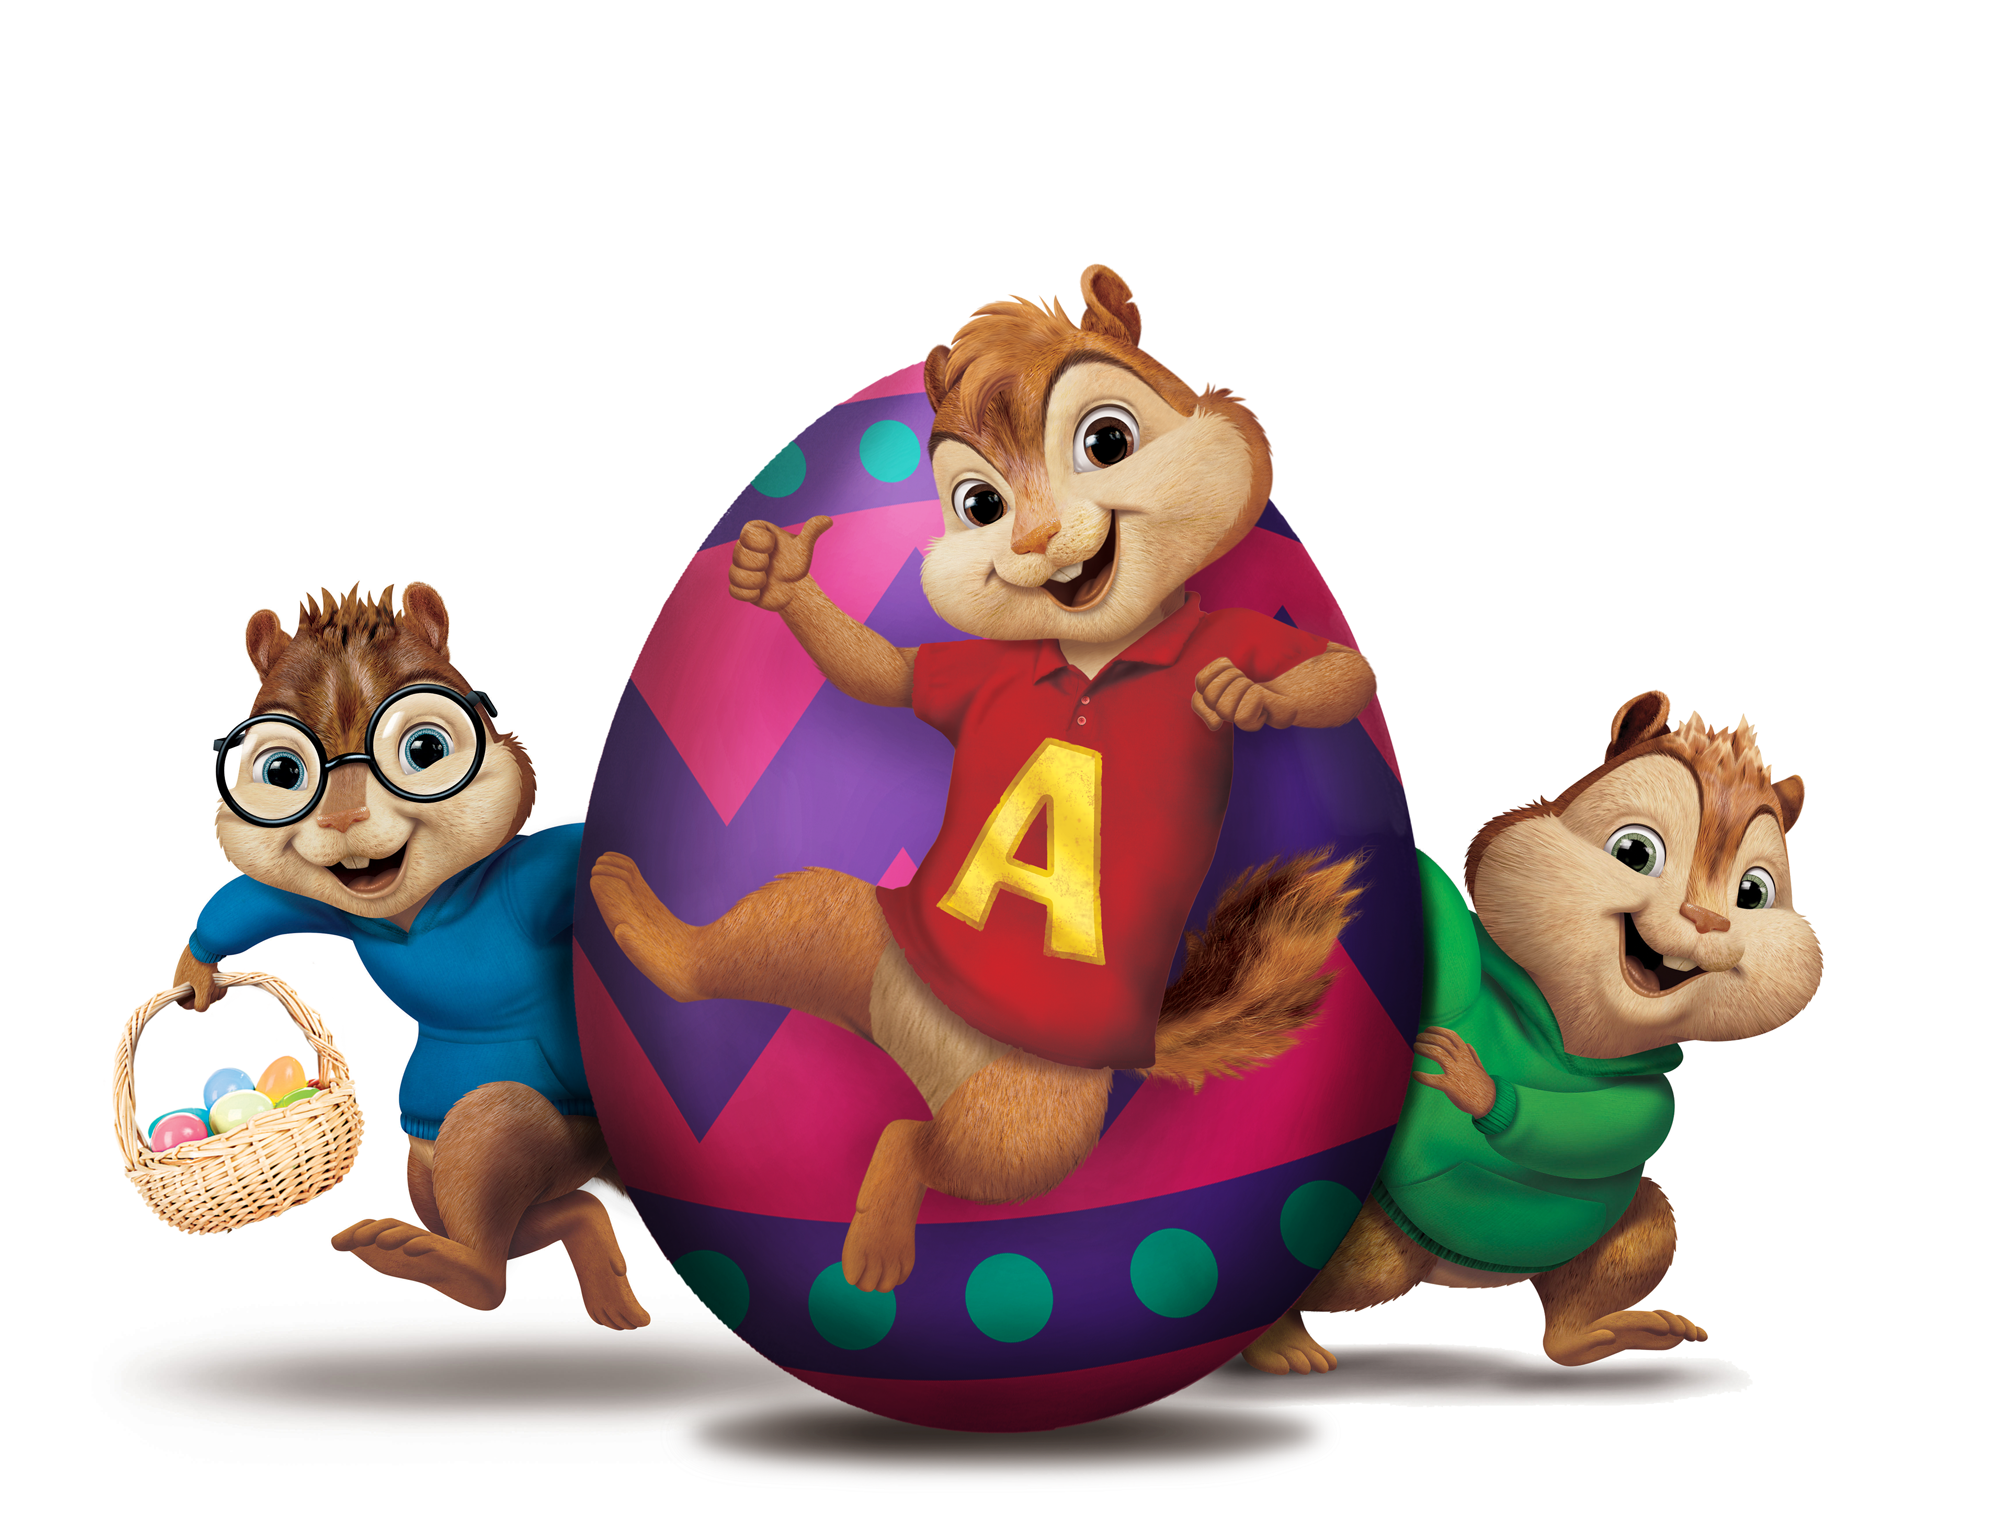 Alvin and the Chipmunks Ready for Easter.